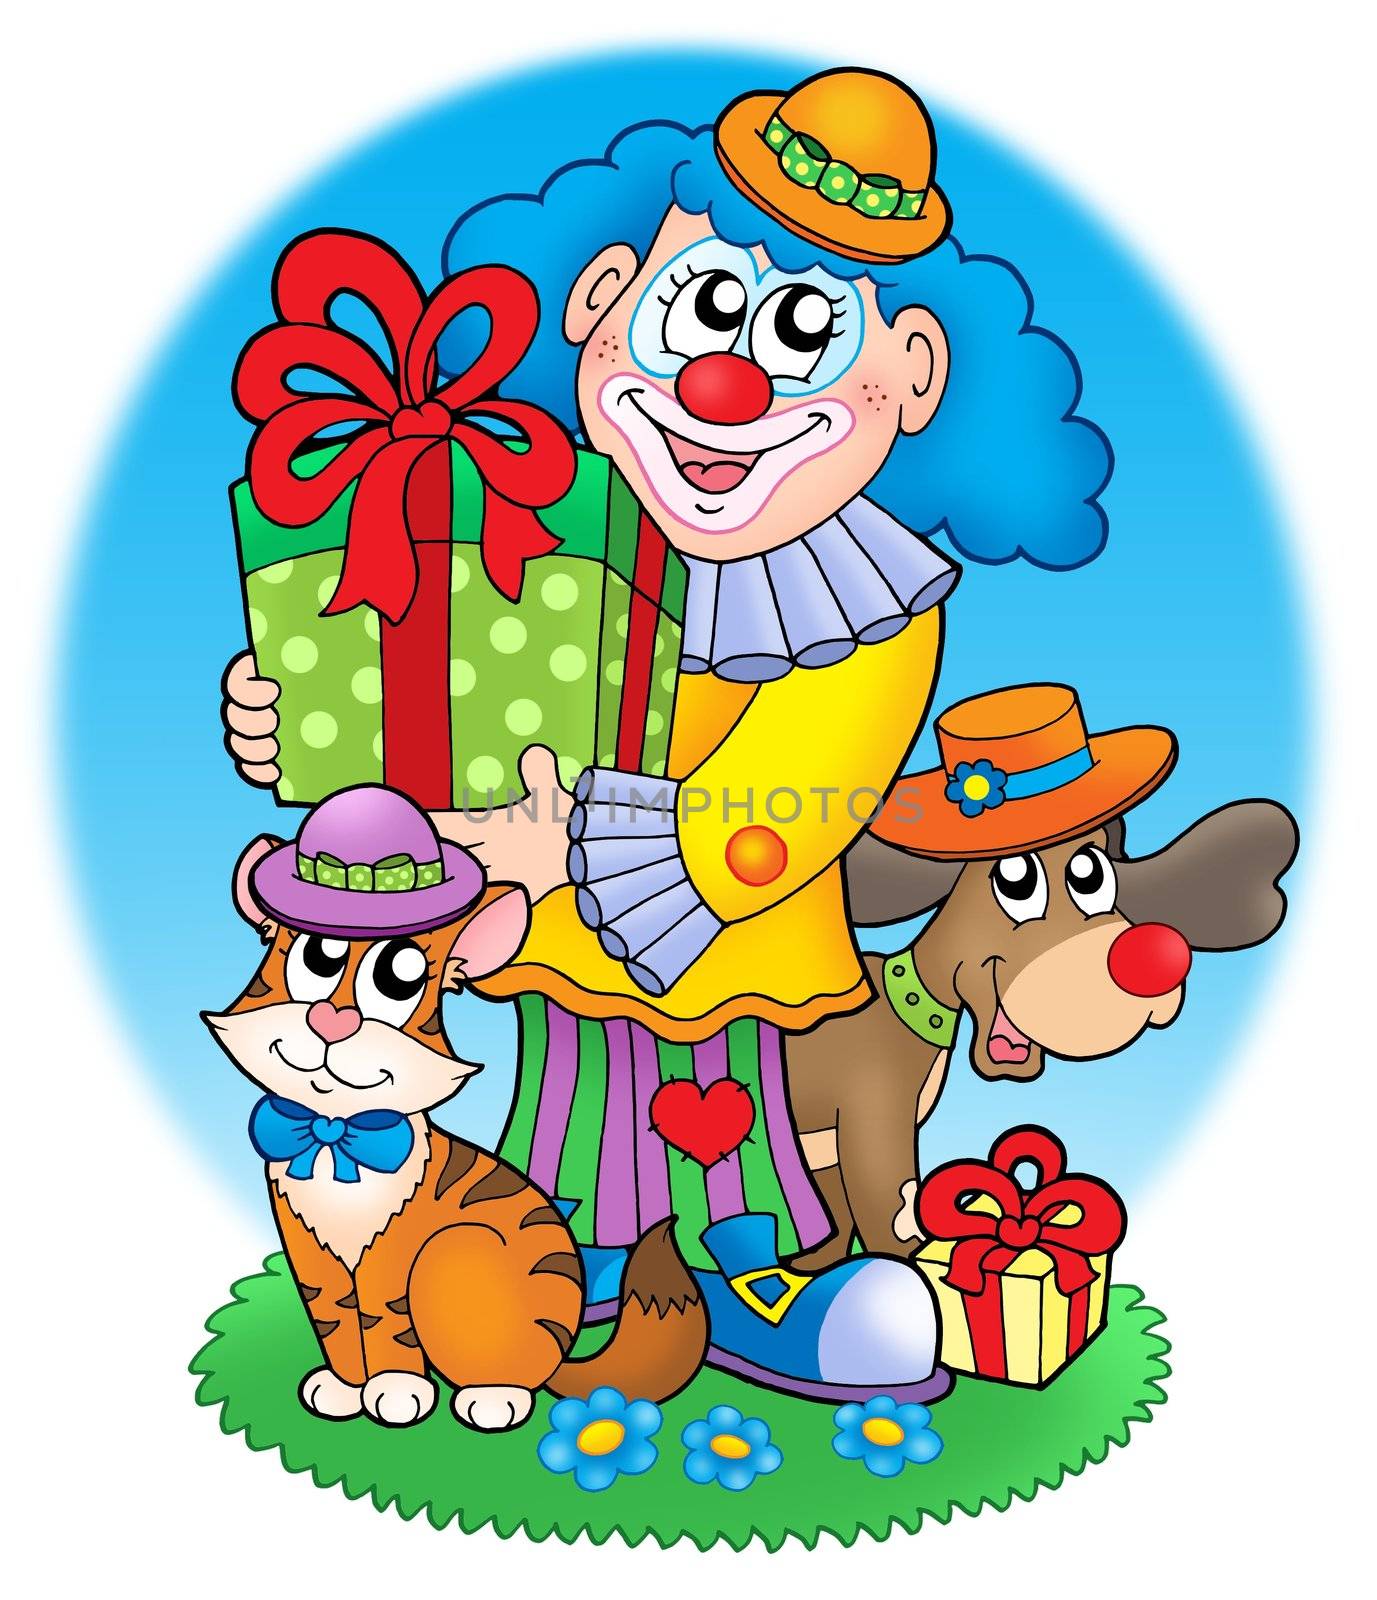 Circus clown with pets - color illustration.